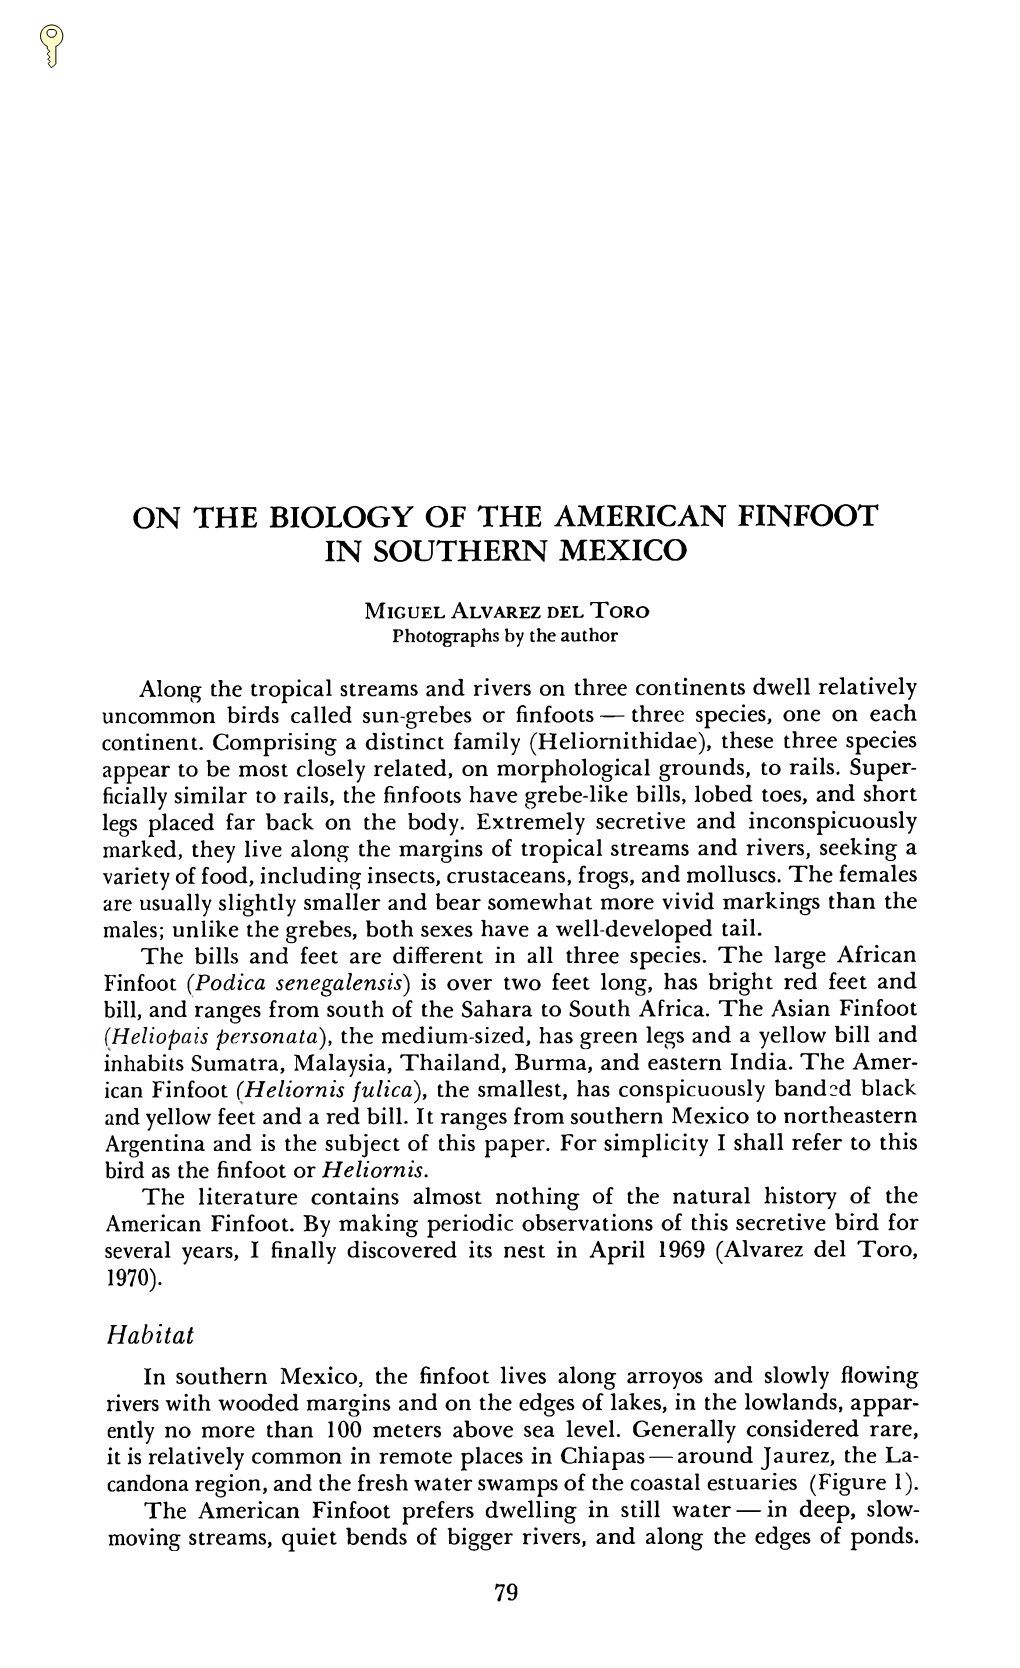 On the Biology of the American Finfoot in Southern Mexico